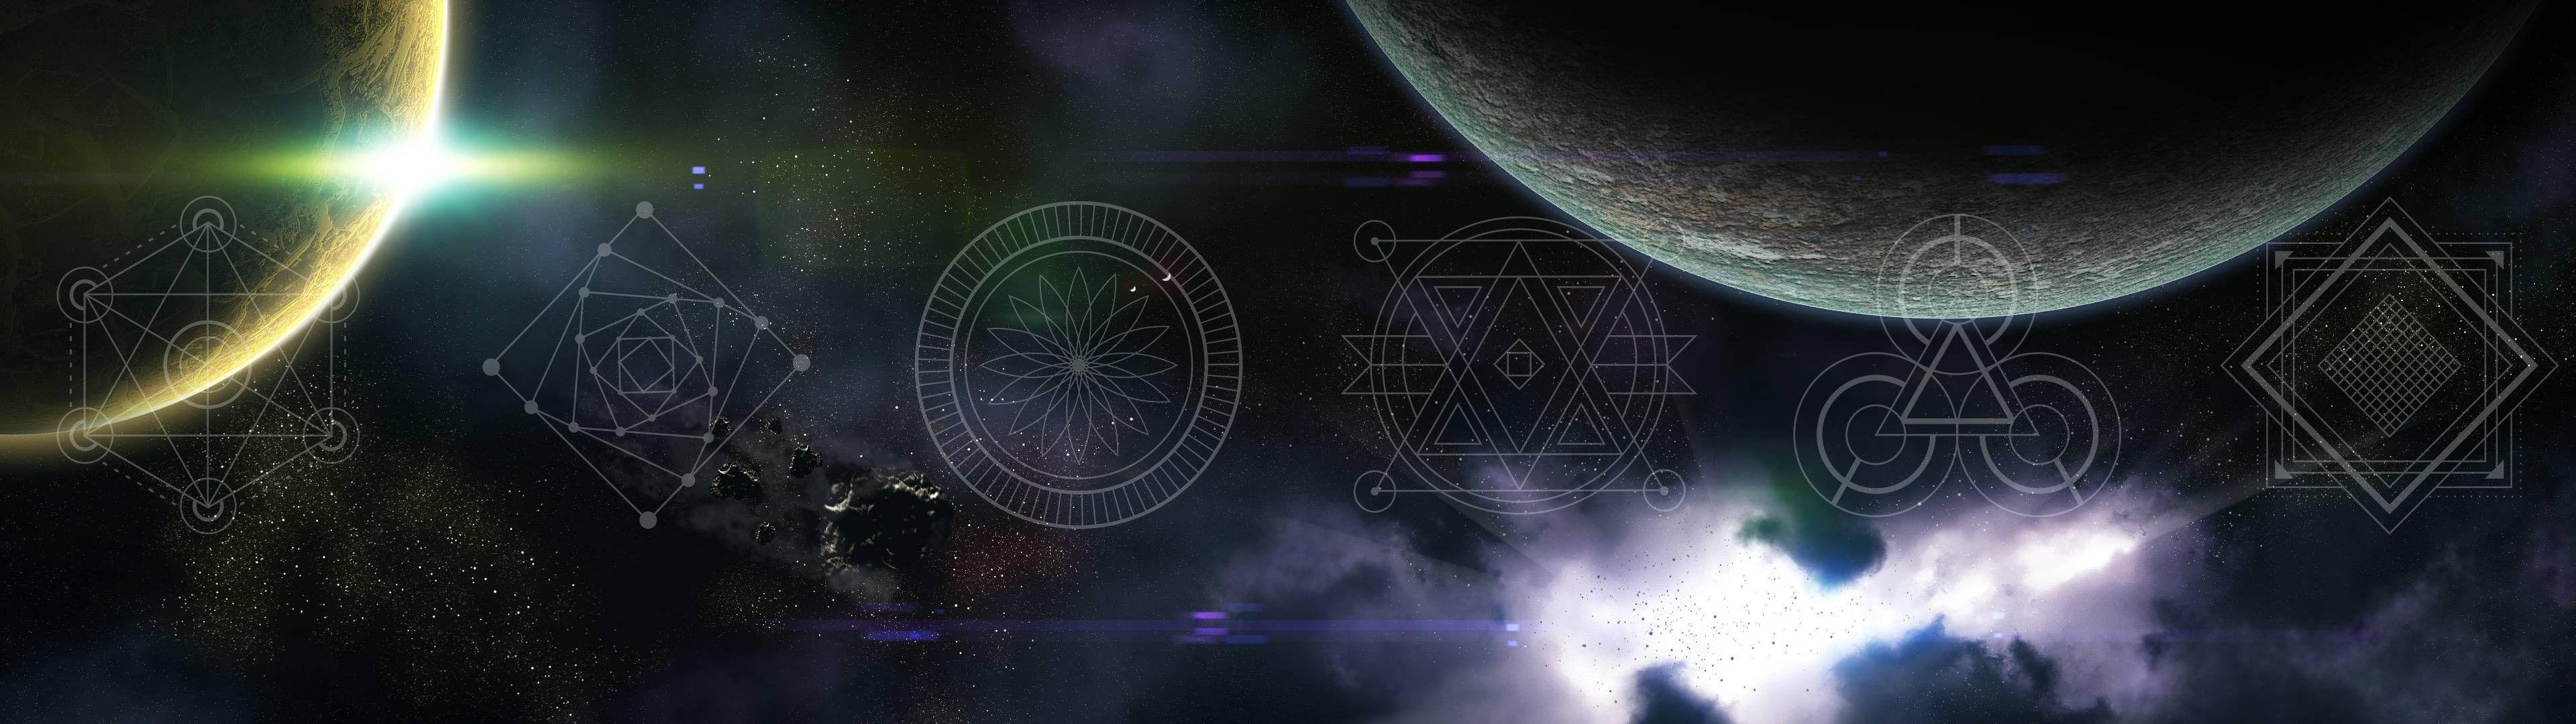 Sacred geometry and space wallpaper (part1)